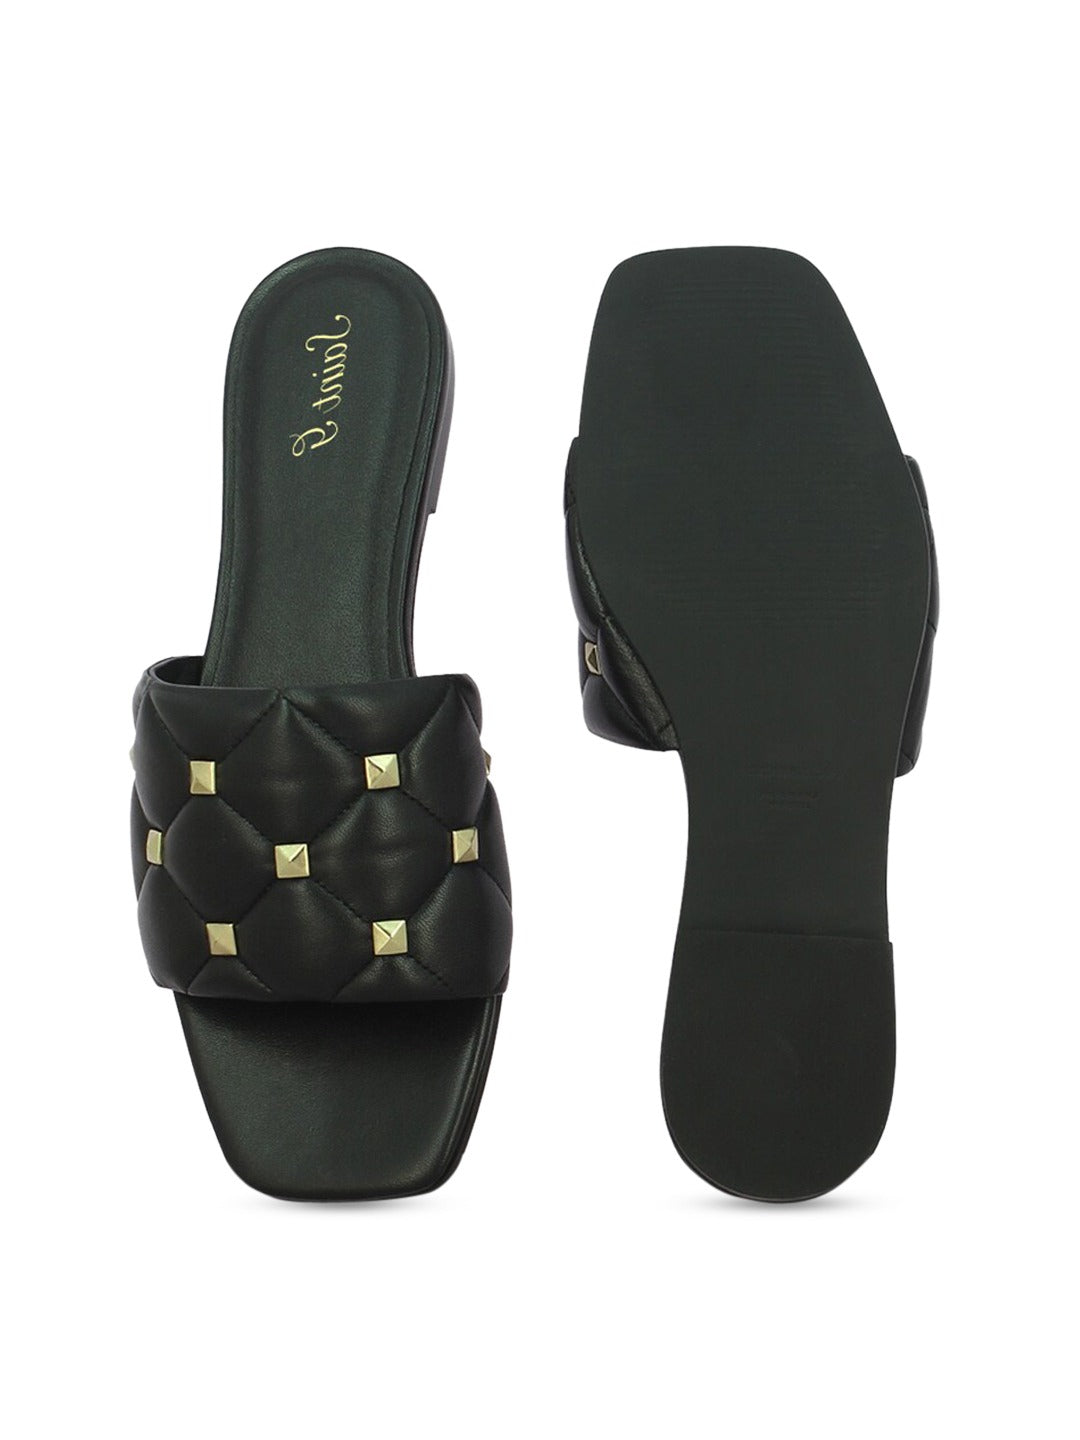 Saint Ludovica Black Leather Slides: Handcrafted elegance for ultimate comfort and style